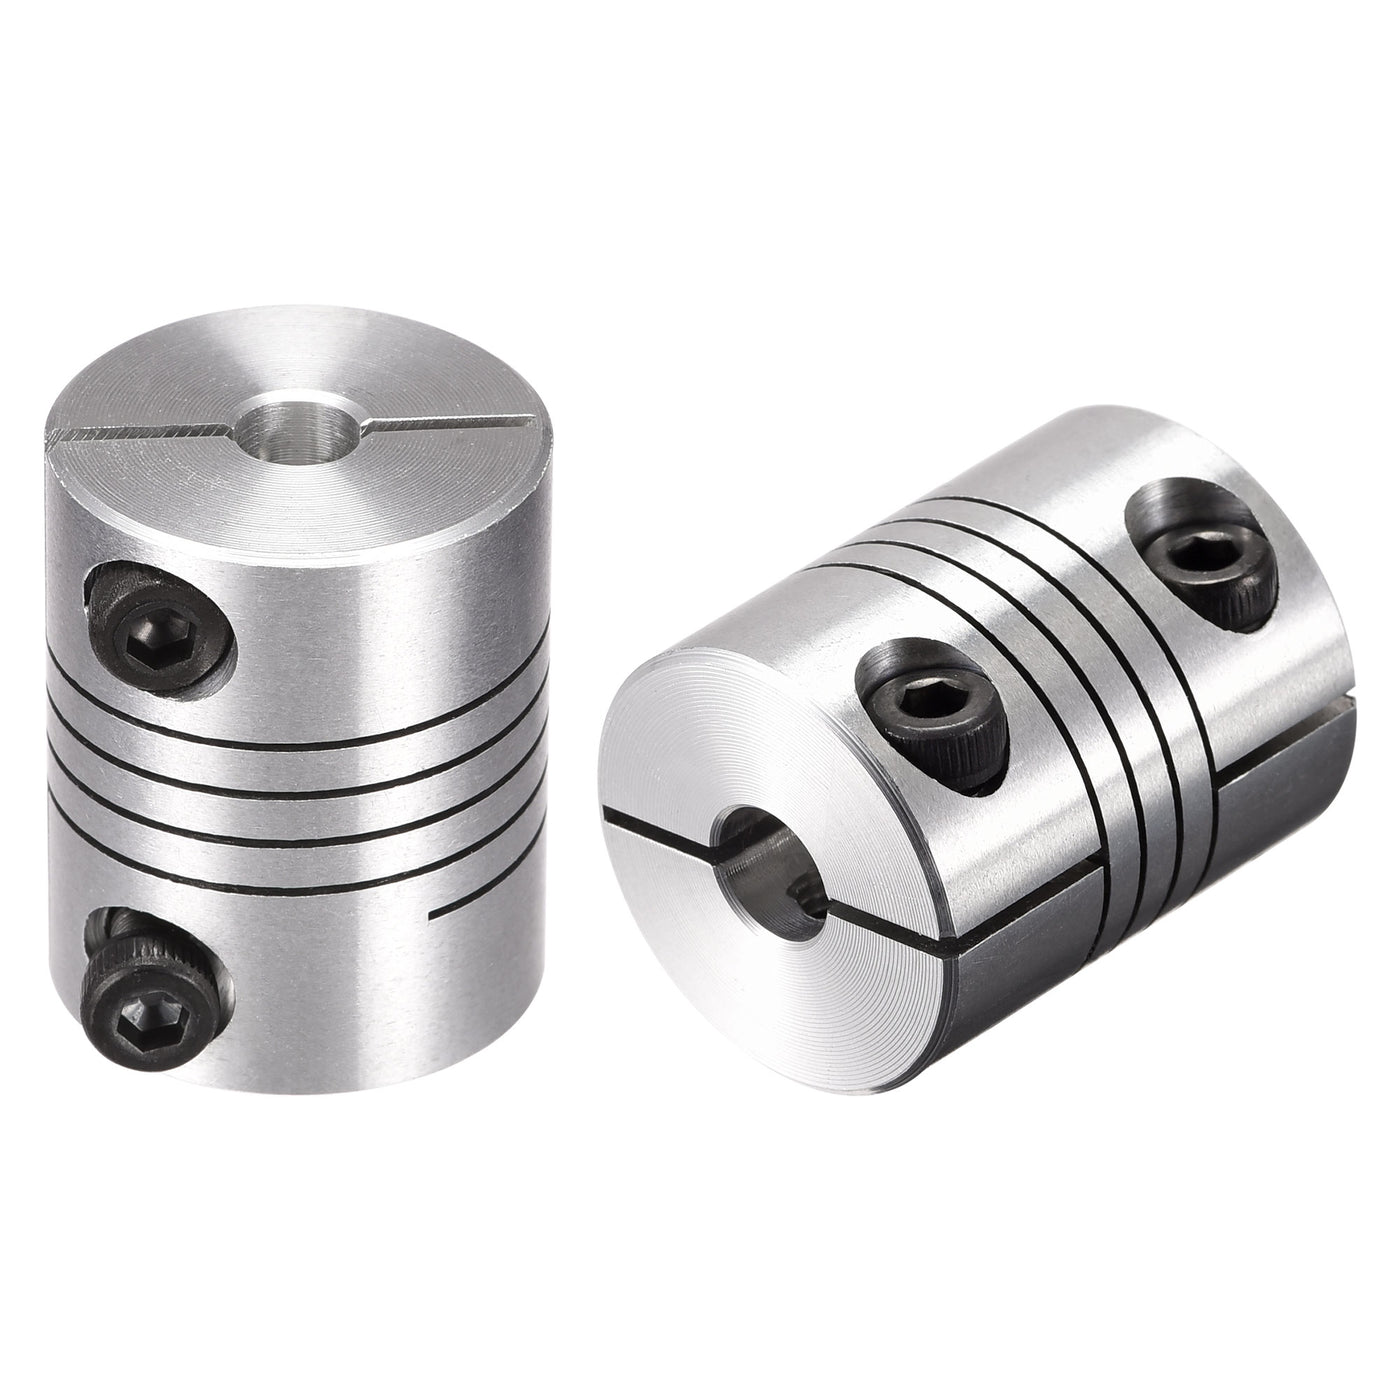 uxcell Uxcell 2PCS Motor Shaft 6mm to 6.35mm Helical Beam Coupler Coupling 20mm Dia 25mm Long